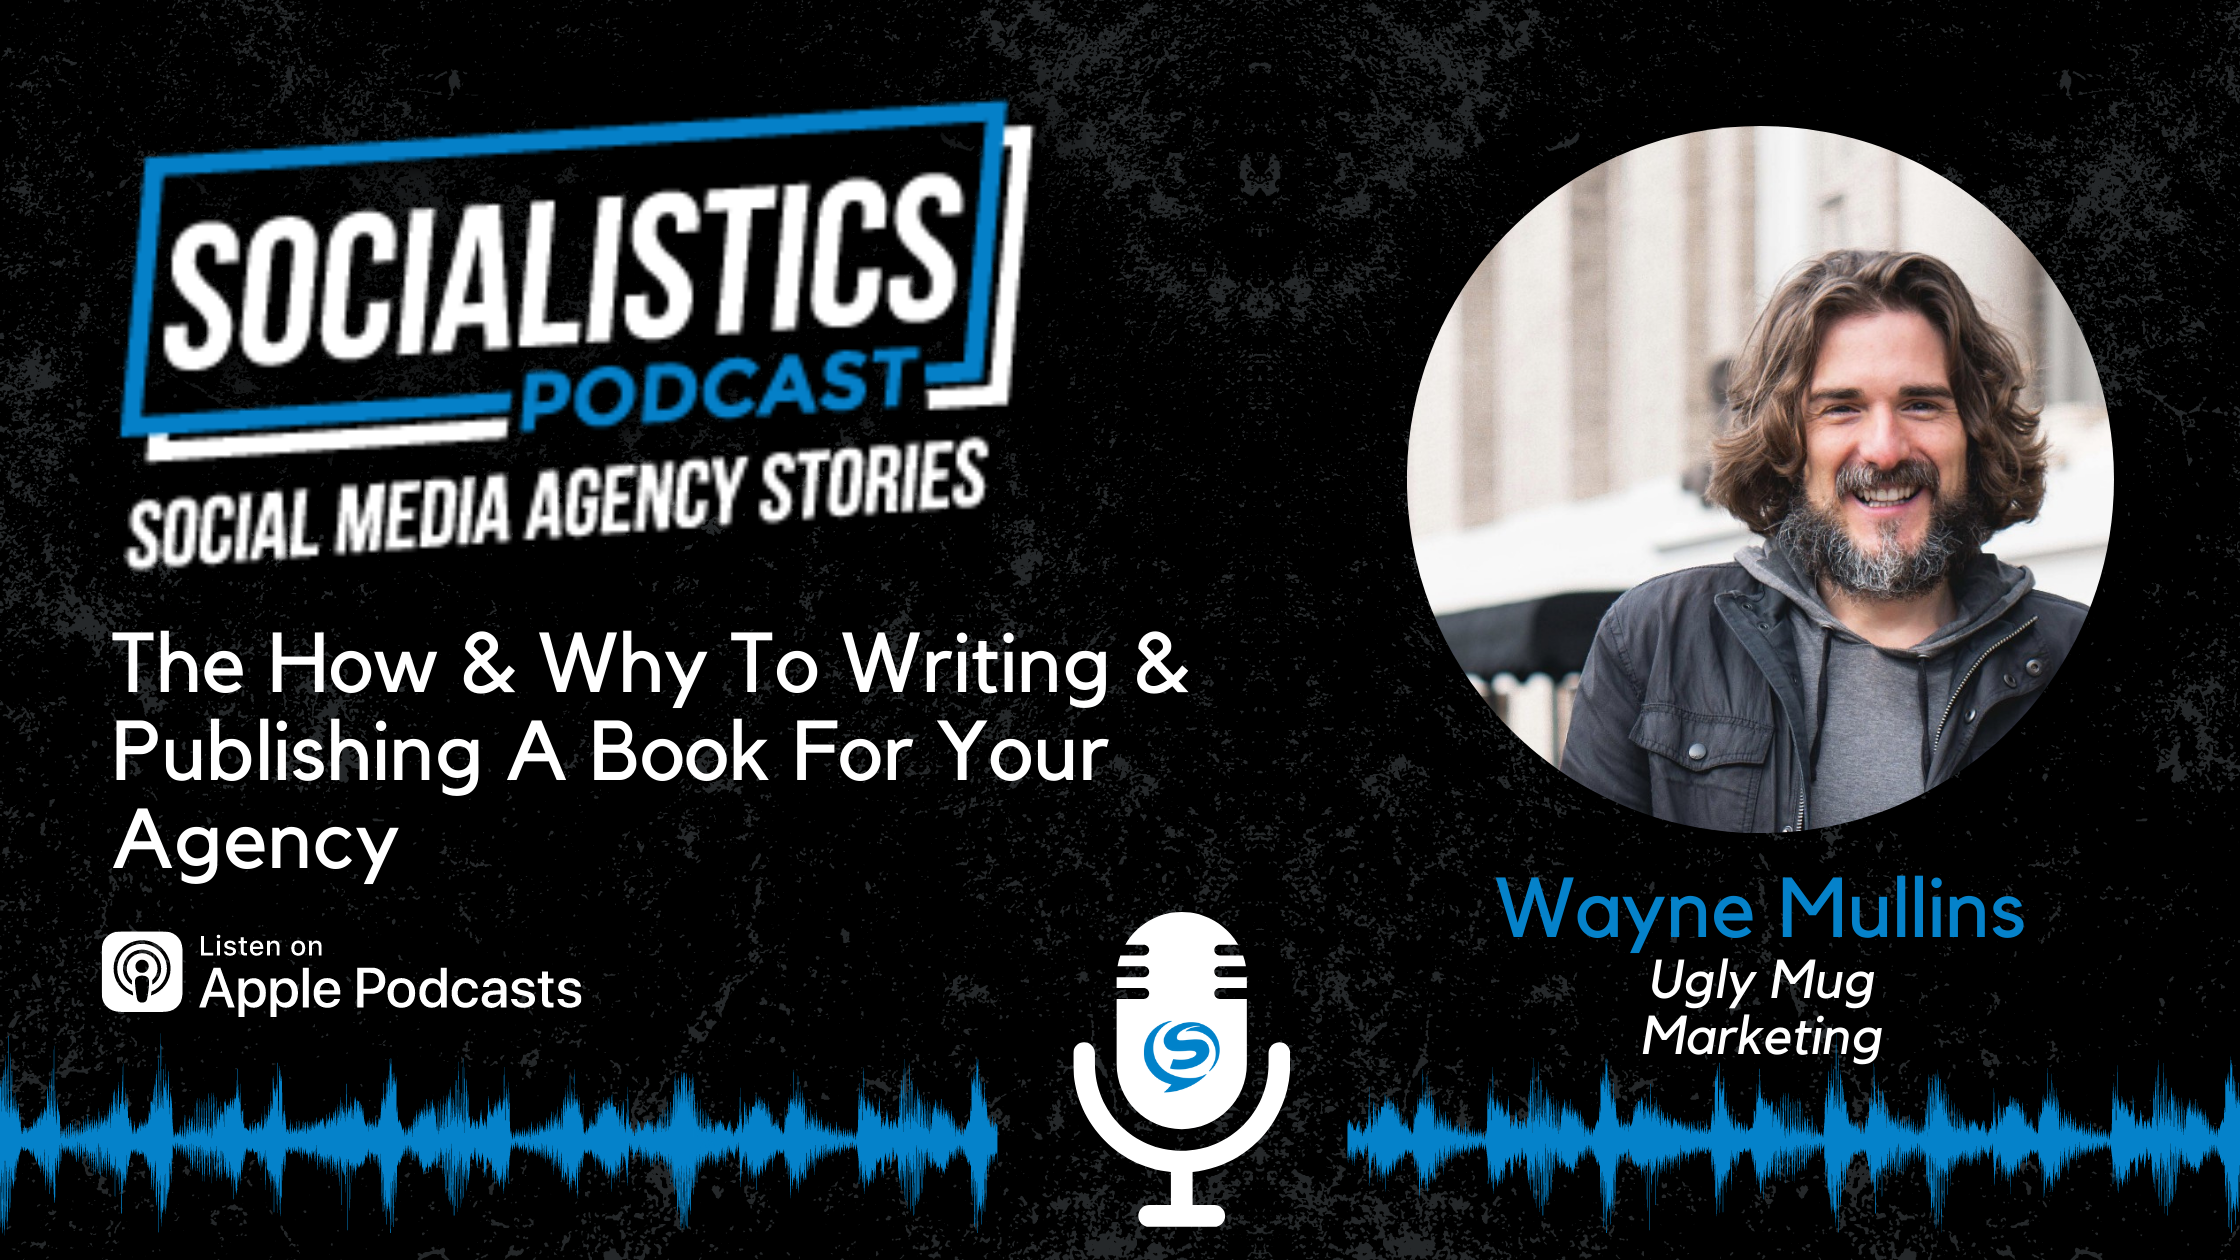 The How & Why of Writing & Publishing A Book For Your Agency